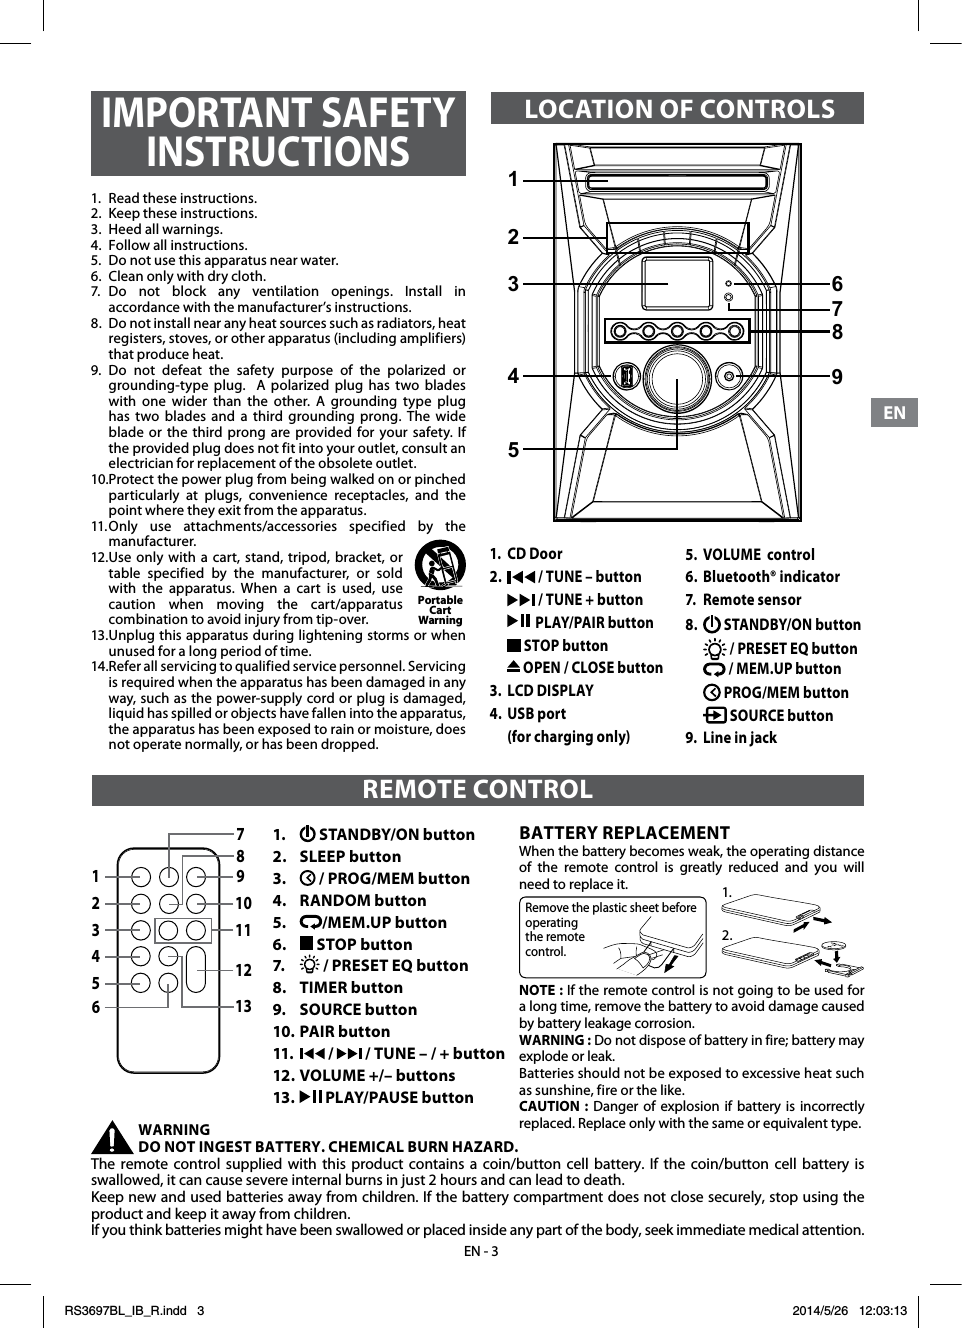 ENENEN - 31.  Read these instructions.2.  Keep these instructions.3.  Heed all warnings.4.  Follow all instructions.5.  Do not use this apparatus near water.6.  Clean only with dry cloth.7. Do not block any ventilation openings. Install in accordance with the manufacturer’s instructions.8.  Do not install near any heat sources such as radiators, heat registers, stoves, or other apparatus (including amplifiers) that produce heat.9.  Do  not  defeat  the  safety  purpose  of  the  polarized  or grounding-type plug.  A polarized plug has two blades with one wider than the other. A grounding type plug has two blades and a third grounding prong. The wide blade or the third prong are provided for your safety. If the provided plug does not fit into your outlet, consult an electrician for replacement of the obsolete outlet.10. Protect the power plug from being walked on or pinched particularly at plugs, convenience receptacles, and the point where they exit from the apparatus.11. Only use attachments/accessories specified by the manufacturer.12. Use only with a cart, stand, tripod, bracket, or table specified by the manufacturer, or sold with the apparatus. When a cart is used, use caution when moving the cart/apparatus combination to avoid injury from tip-over.13. Unplug this apparatus during lightening storms or when unused for a long period of time.14. Refer all servicing to qualified service personnel. Servicing is required when the apparatus has been damaged in any way, such as the power-supply cord or plug is damaged, liquid has spilled or objects have fallen into the apparatus, the apparatus has been exposed to rain or moisture, does not operate normally, or has been dropped.Portable Cart Warning1.  CD Door2.   / TUNE – button   / TUNE + button   PLAY/PAIR button  STOP button   OPEN / CLOSE button3.  LCD DISPLAY 4.  USB port   (for charging only)1.   STANDBY/ON button2.   SLEEP button3.    / PROG/MEM button4.   RANDOM button5.   /MEM.UP button6.   STOP button7.   / PRESET EQ button8.  TIMER button9.  SOURCE button10. PAIR button11.   /   / TUNE – / + button12. VOLUME +/– buttons 13.   PLAY/PAUSE button78910111213123456REMOTE CONTROLBATTERY REPLACEMENTWhen the battery becomes weak, the operating distance of the remote control is greatly reduced and you will need to replace it. NOTE : If the remote control is not going to be used for a long time, remove the battery to avoid damage caused by battery leakage corrosion.WARNING : Do not dispose of battery in fire; battery may explode or leak.Batteries should not be exposed to excessive heat such as sunshine, fire or the like.CAUTION : Danger of explosion if battery is incorrectly replaced. Replace only with the same or equivalent type.WARNING DO NOT INGEST BATTERY. CHEMICAL BURN HAZARD. The remote control supplied with this product contains a coin/button cell battery. If the coin/button cell battery is swallowed, it can cause severe internal burns in just 2 hours and can lead to death. Keep new and used batteries away from children. If the battery compartment does not close securely, stop using the product and keep it away from children. If you think batteries might have been swallowed or placed inside any part of the body, seek immediate medical attention.Remove the plastic sheet before operating the remote control.1.2.IMPORTANT SAFETY INSTRUCTIONSLOCATION OF CONTROLS5.  VOLUME  control6.  Bluetooth® indicator7.  Remote sensor8.   STANDBY/ON button  / PRESET EQ button  / MEM.UP button  PROG/MEM button   SOURCE button 9.  Line in jack123679845RS3697BL_IB_R.indd   3 2014/5/26   12:03:13